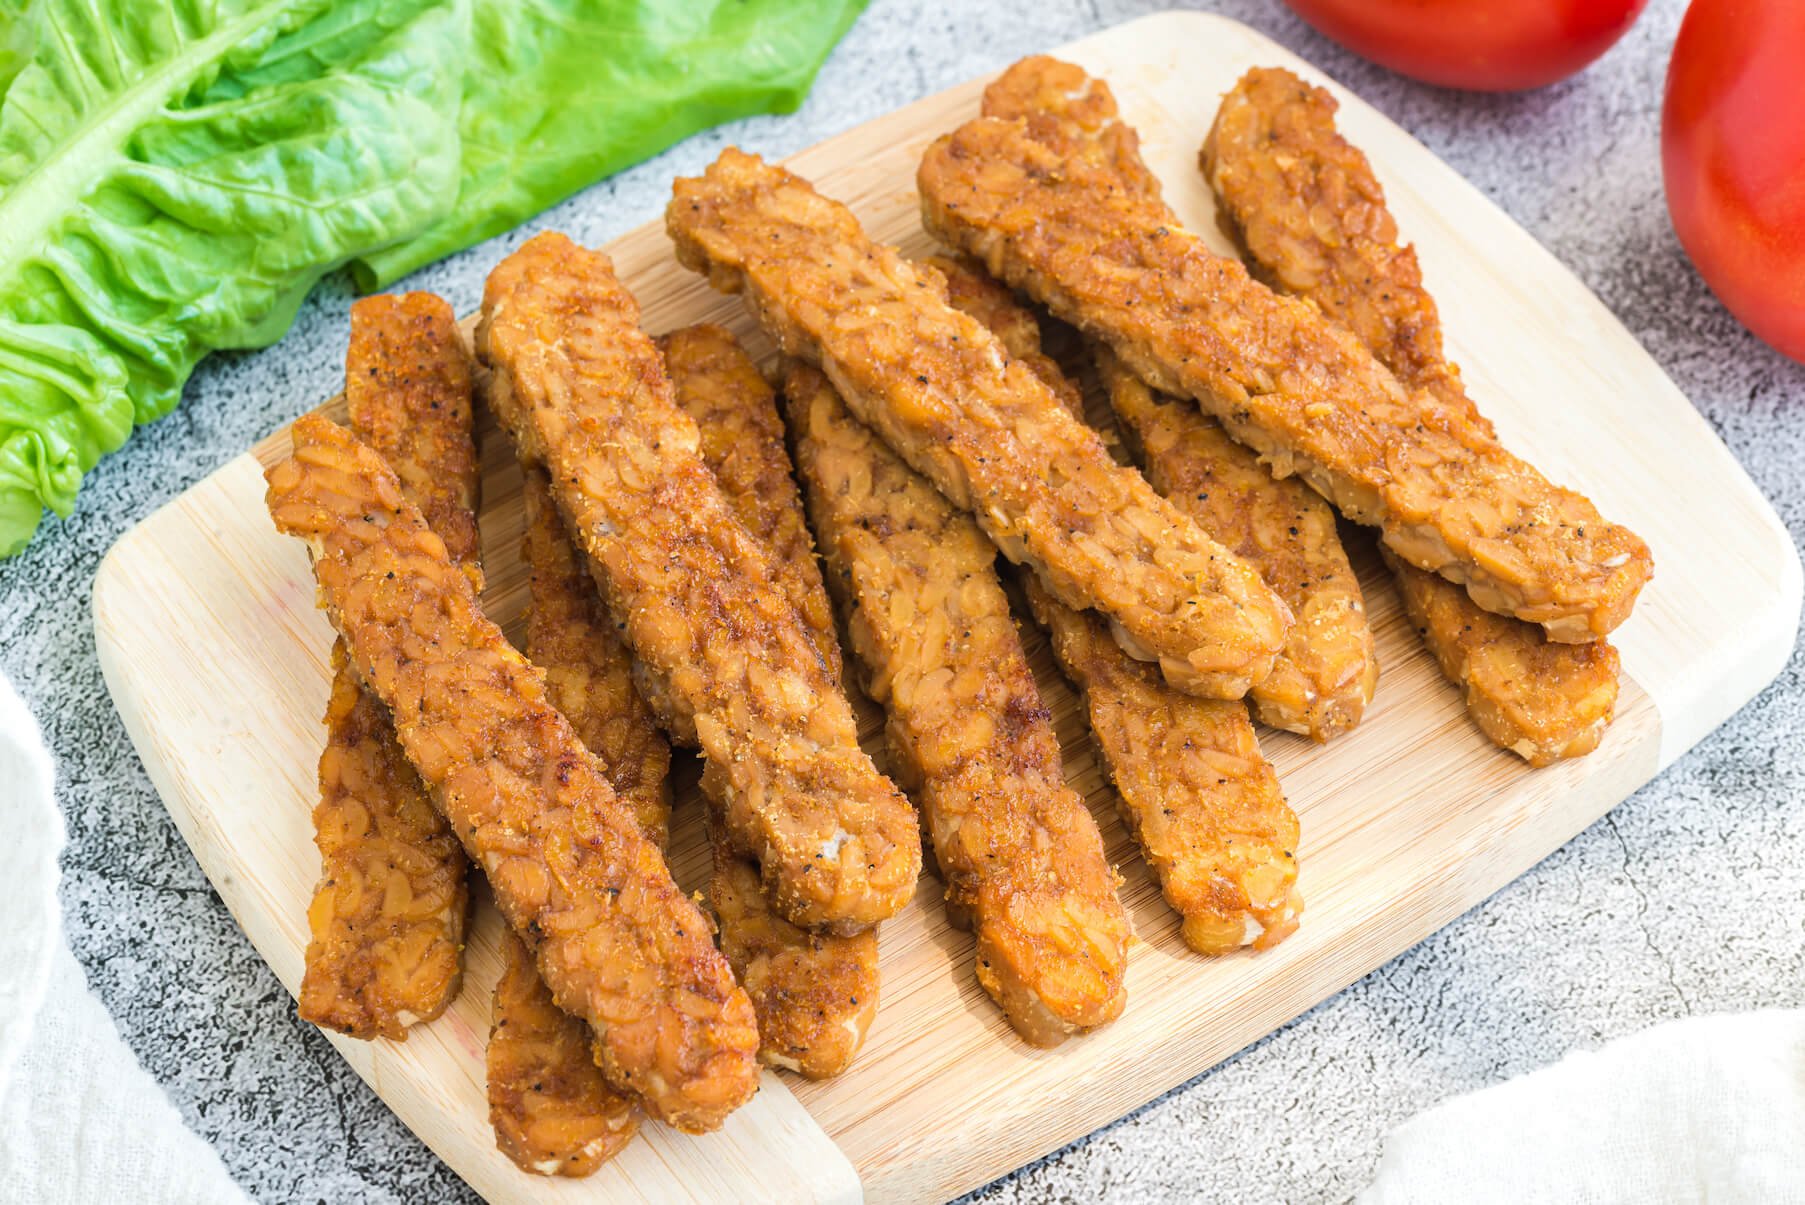 tempeh is a top plant-based protein